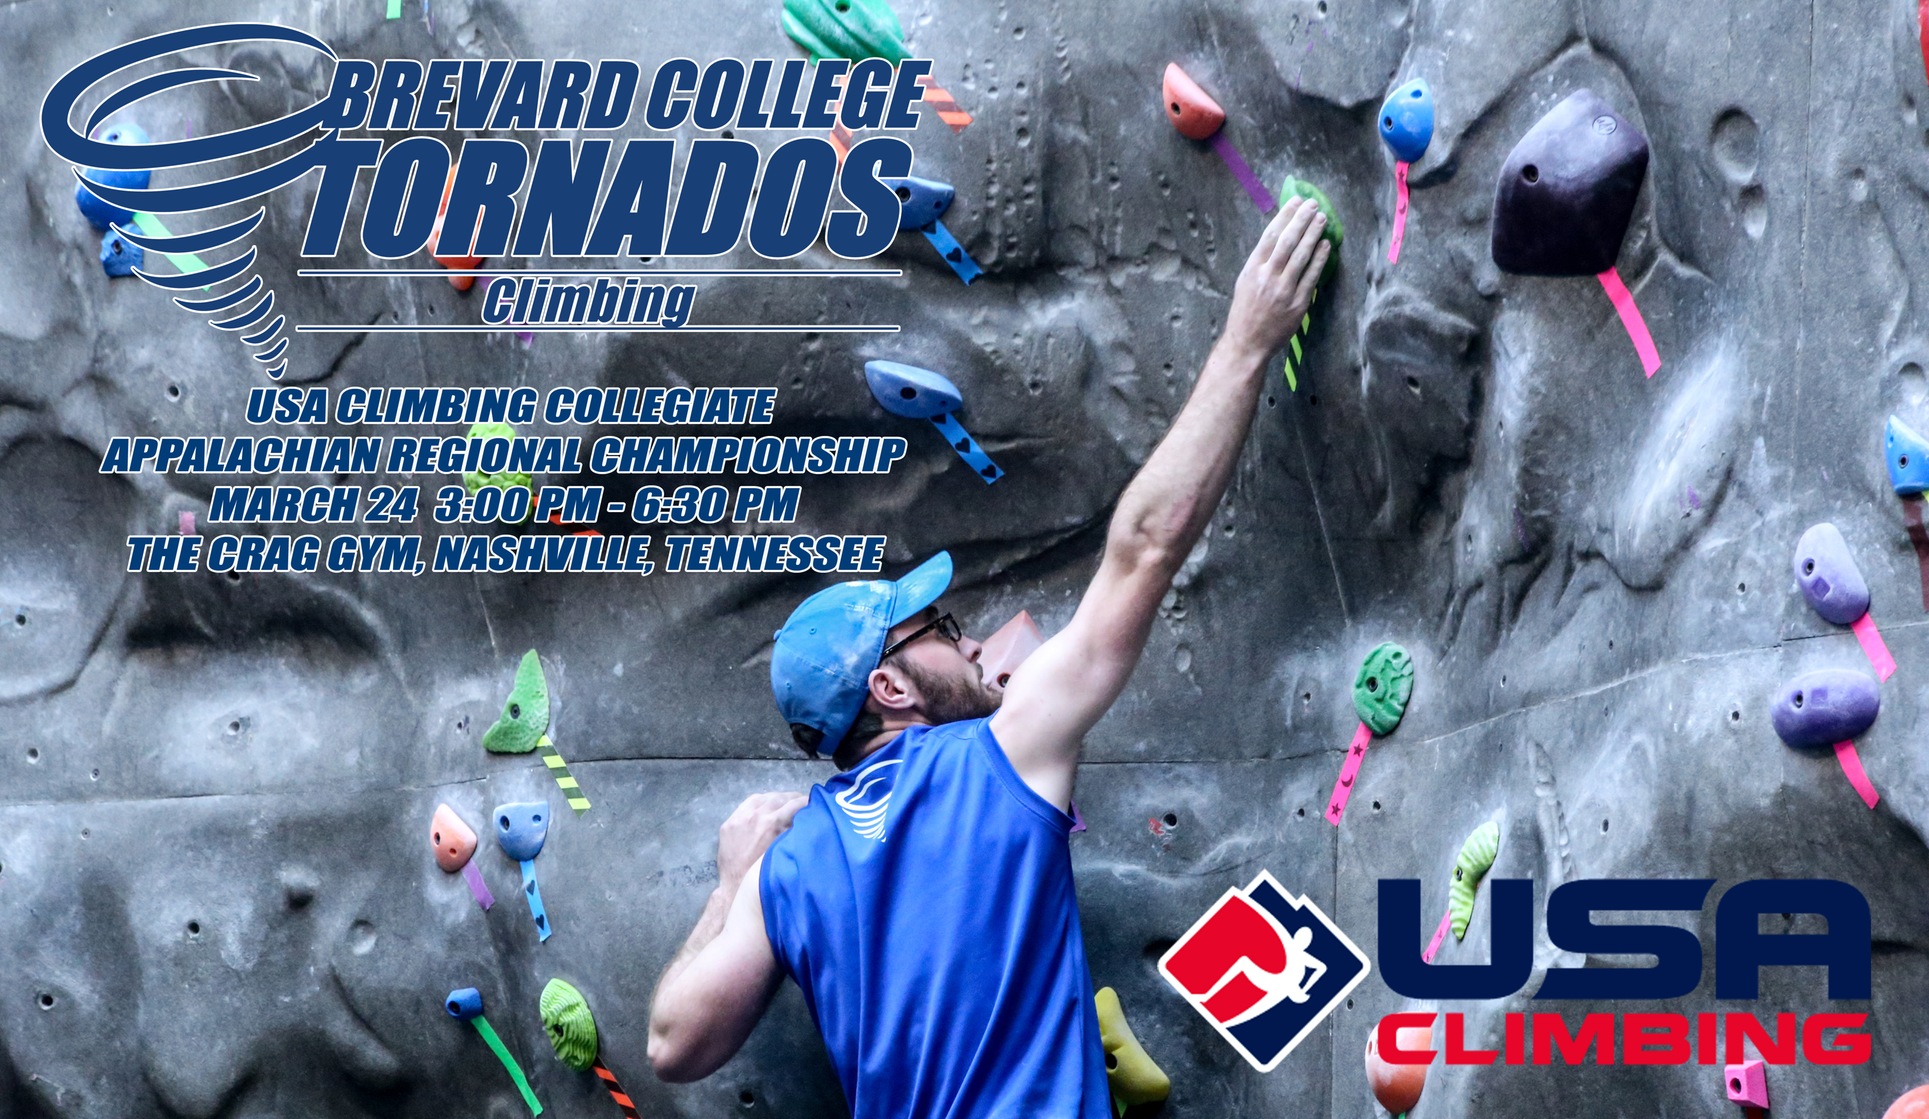 Rock Climbing Heads to Nashville for USAC Regional Championship